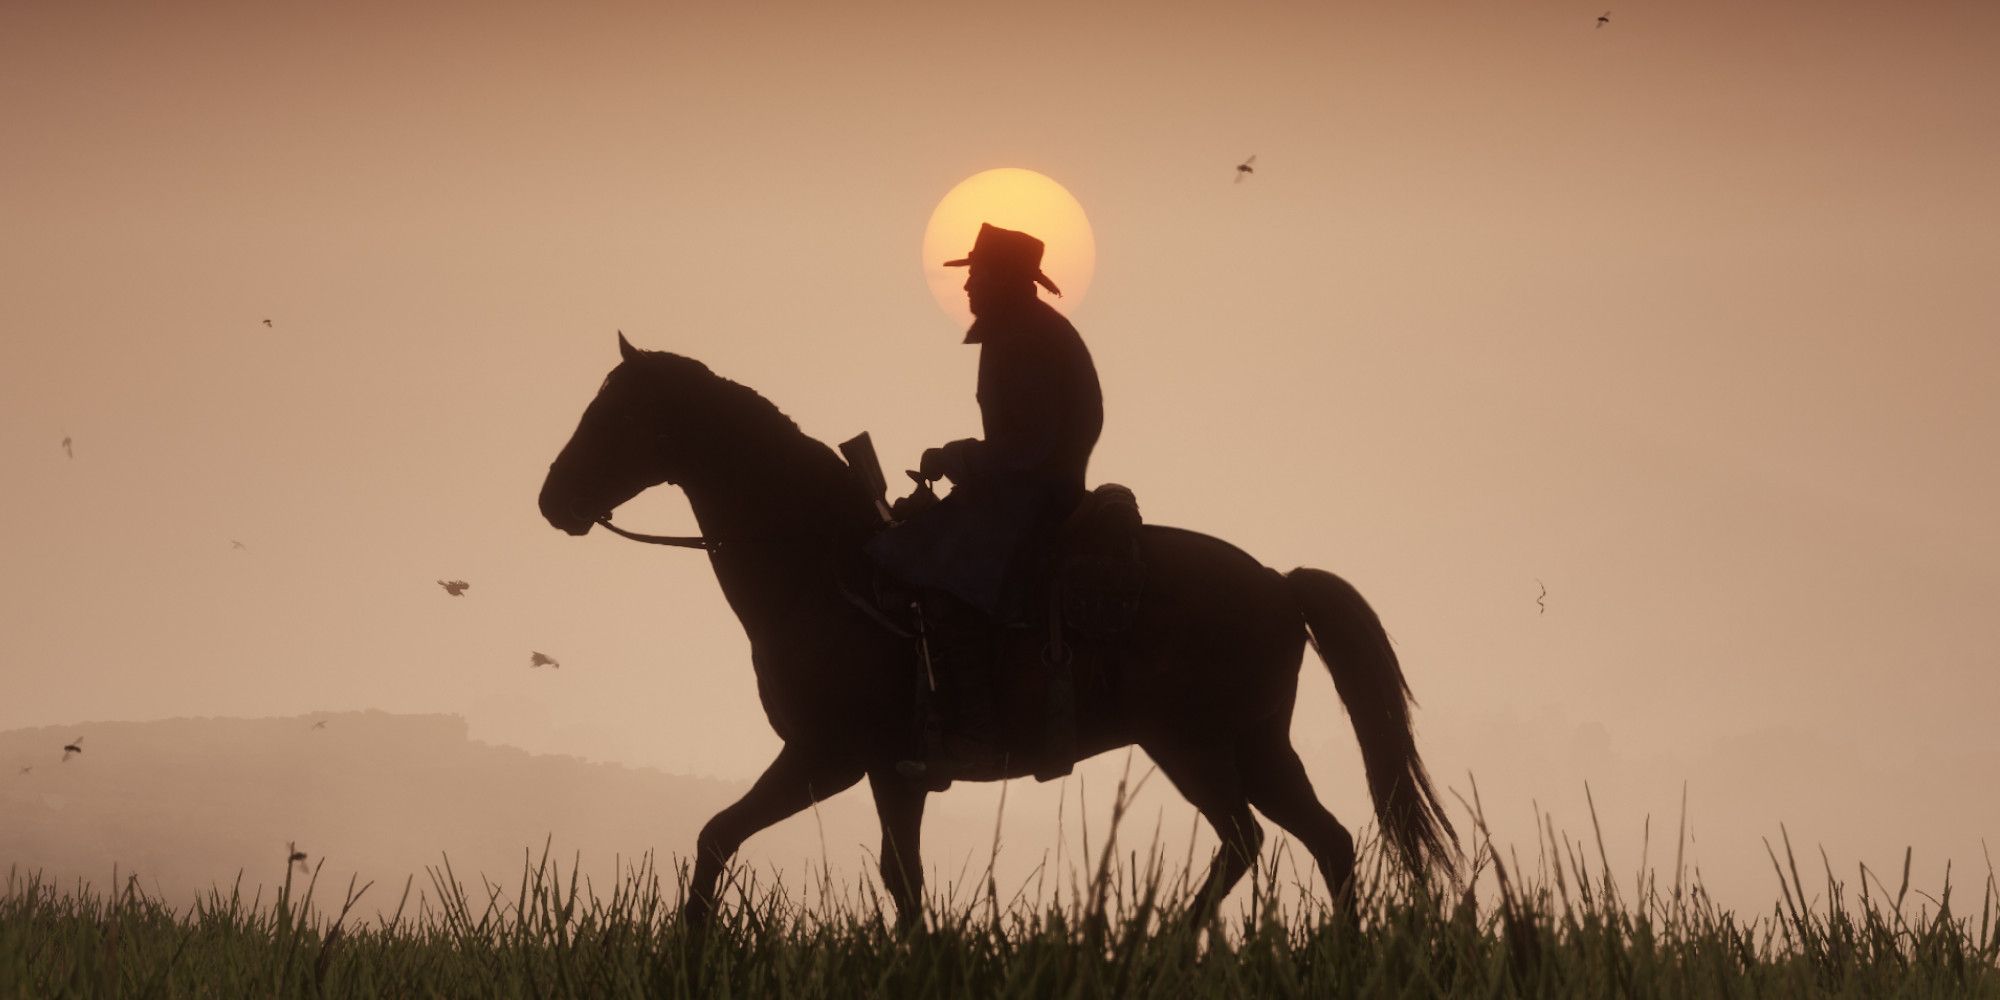 A cowboy rides a horse in front of a sunset